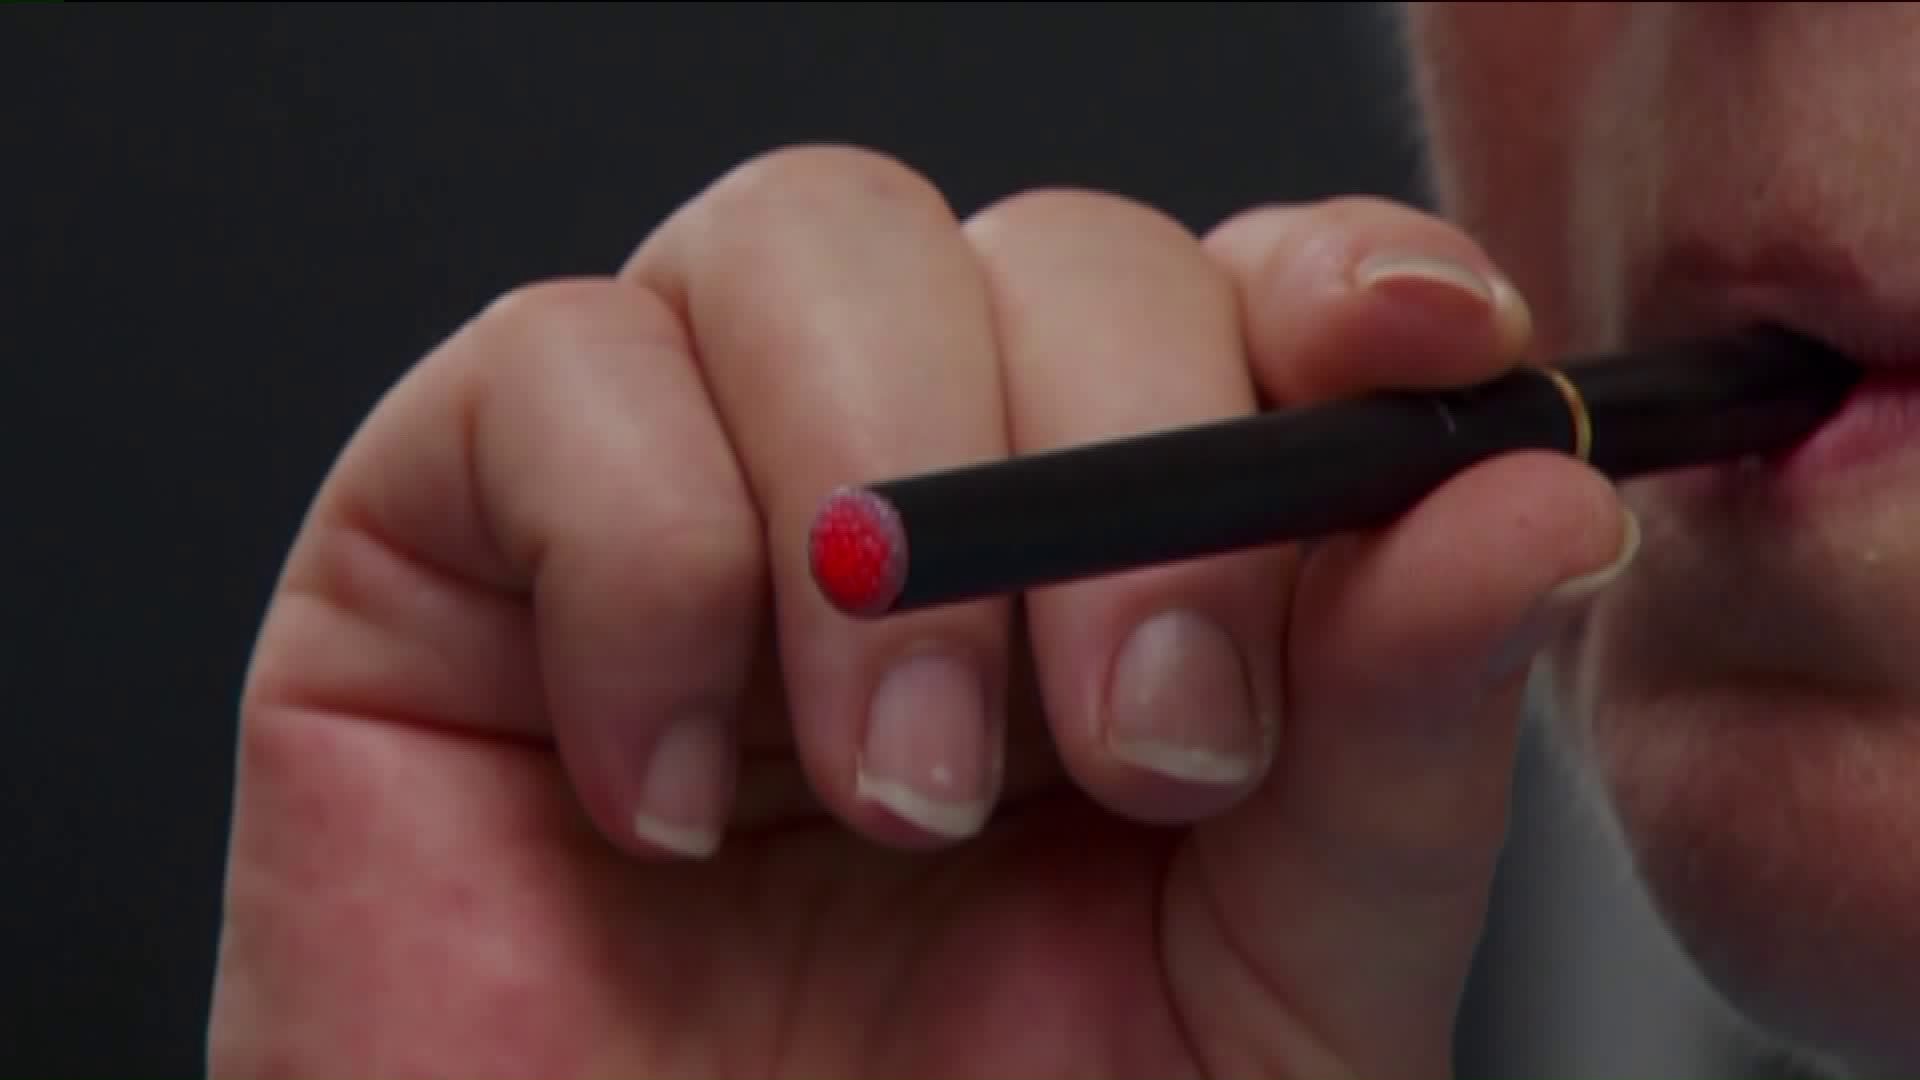 Teens sound off on e-cigarettes usage in CT